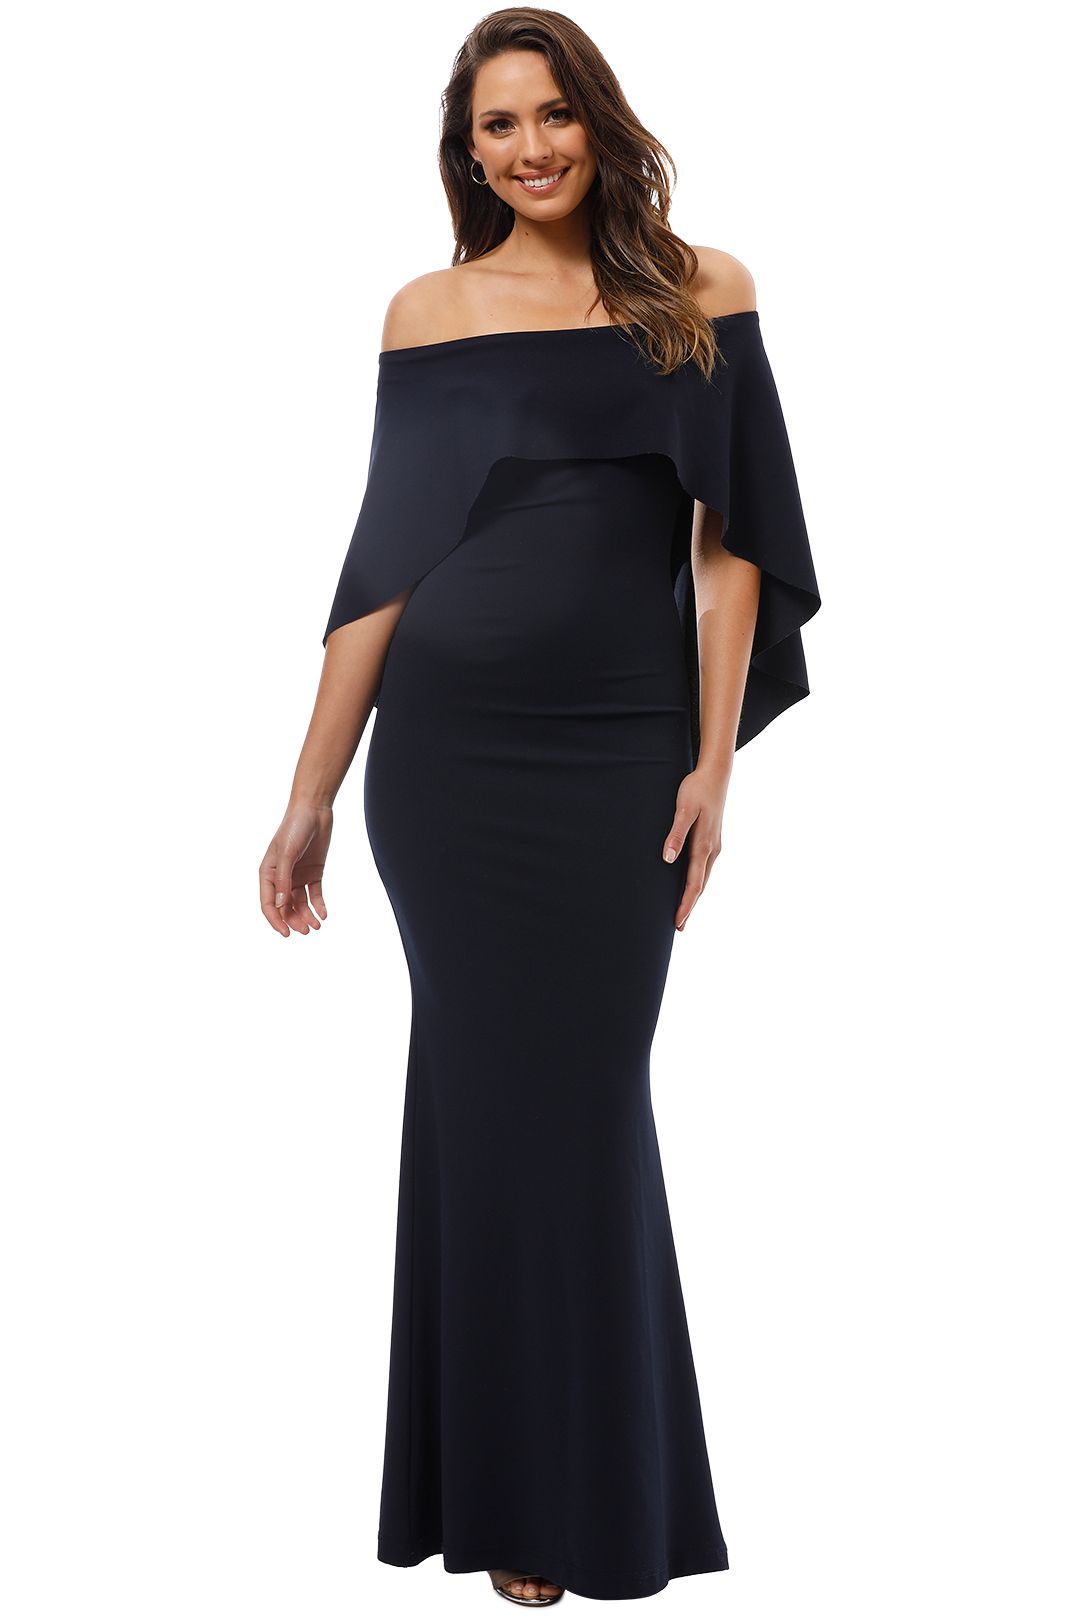 Pasduchas - Composure Gown - Navy - Front